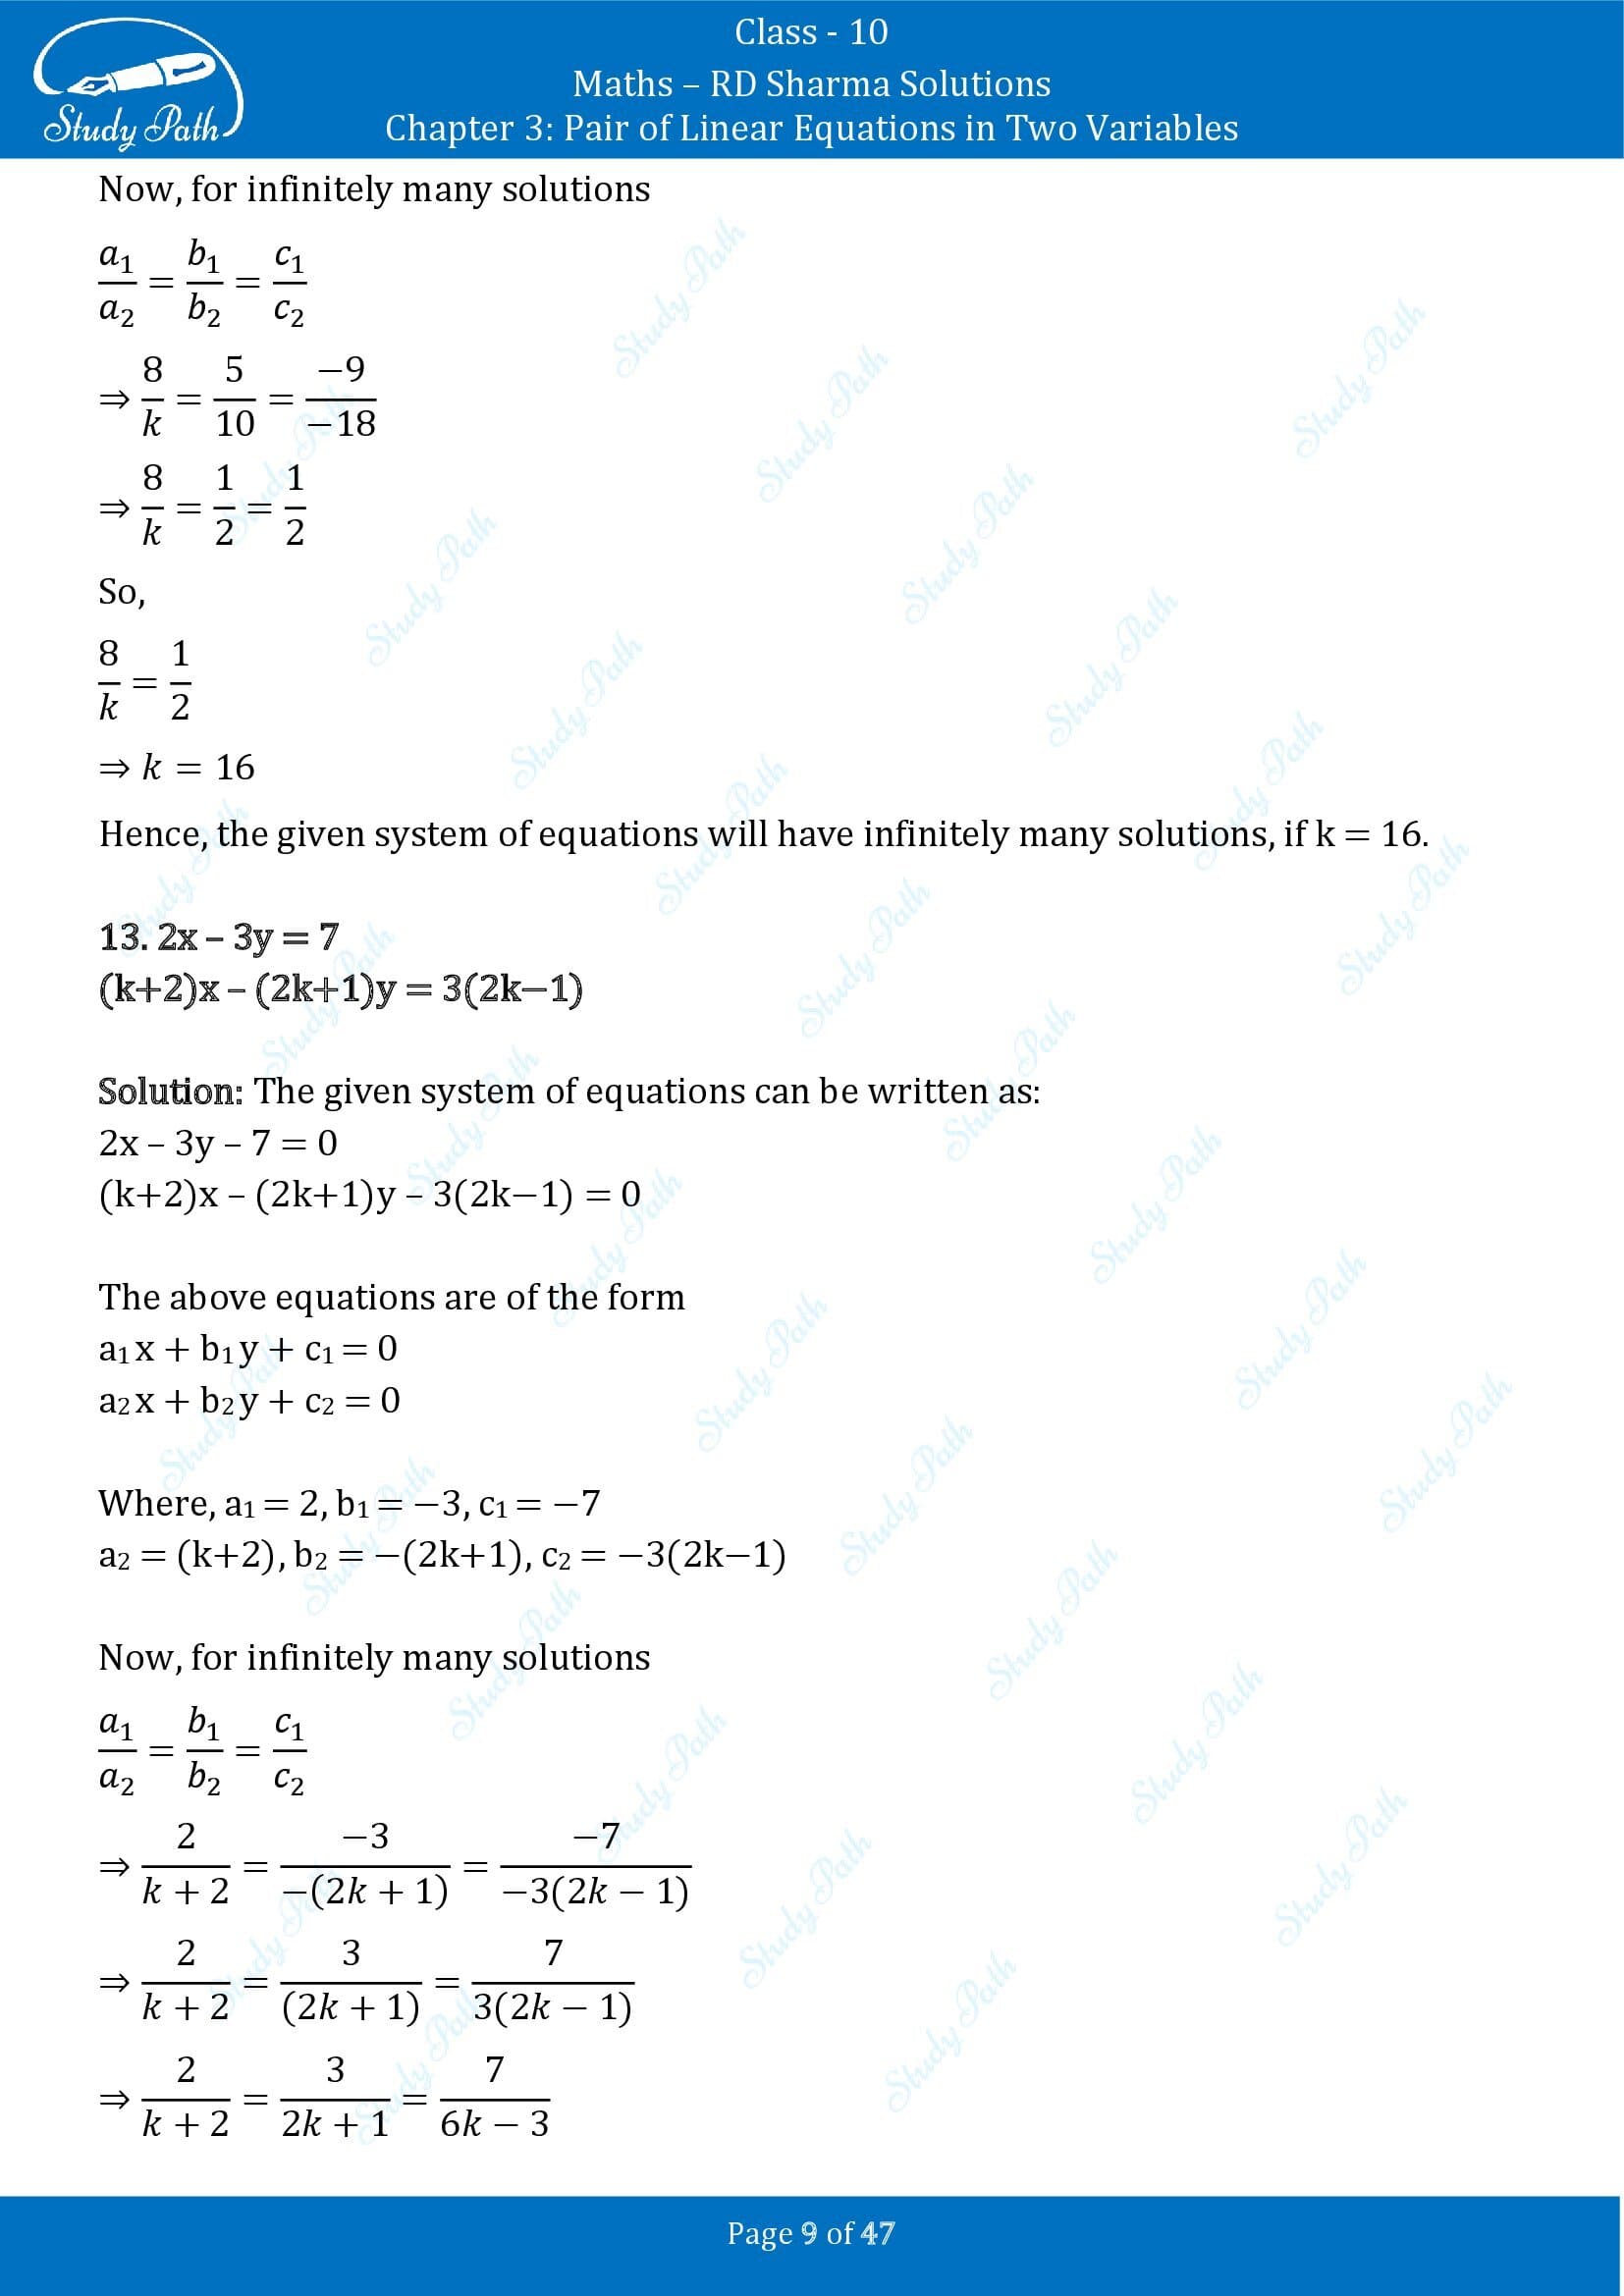 RD Sharma Solutions Class 10 Chapter 3 Pair of Linear Equations in Two Variables Exercise 3.5 00009